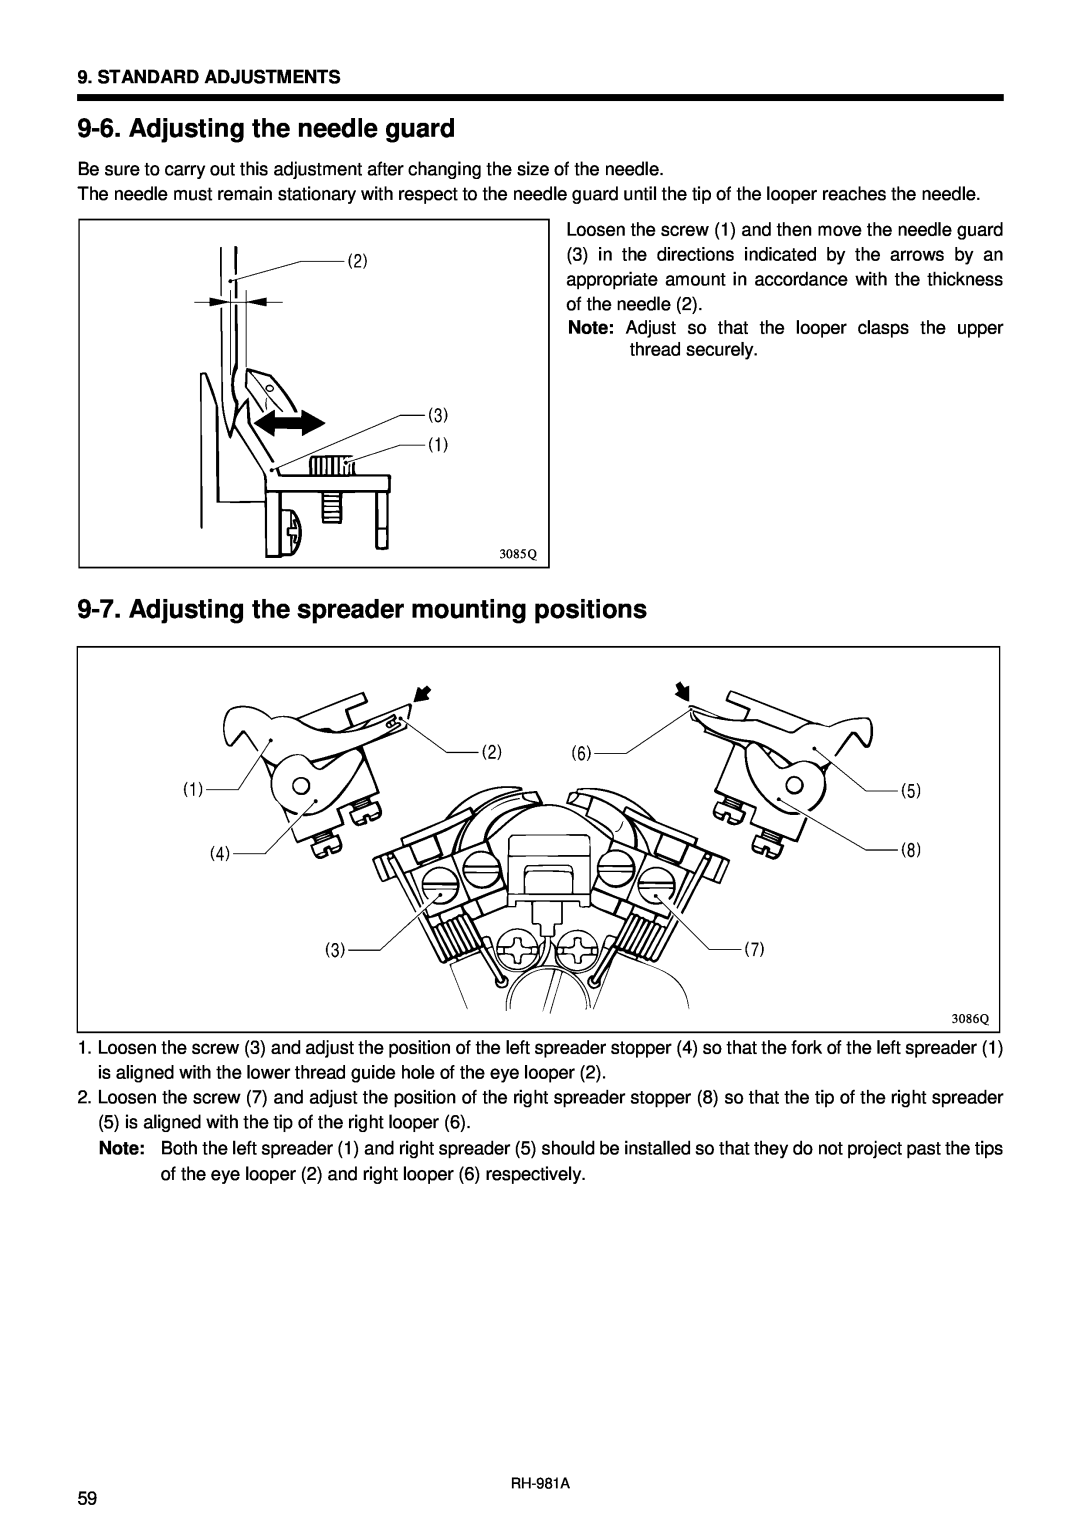 Brother rh-918a manual Adjusting the needle guard, Adjusting the spreader mounting positions, 3085Q, 3086Q 